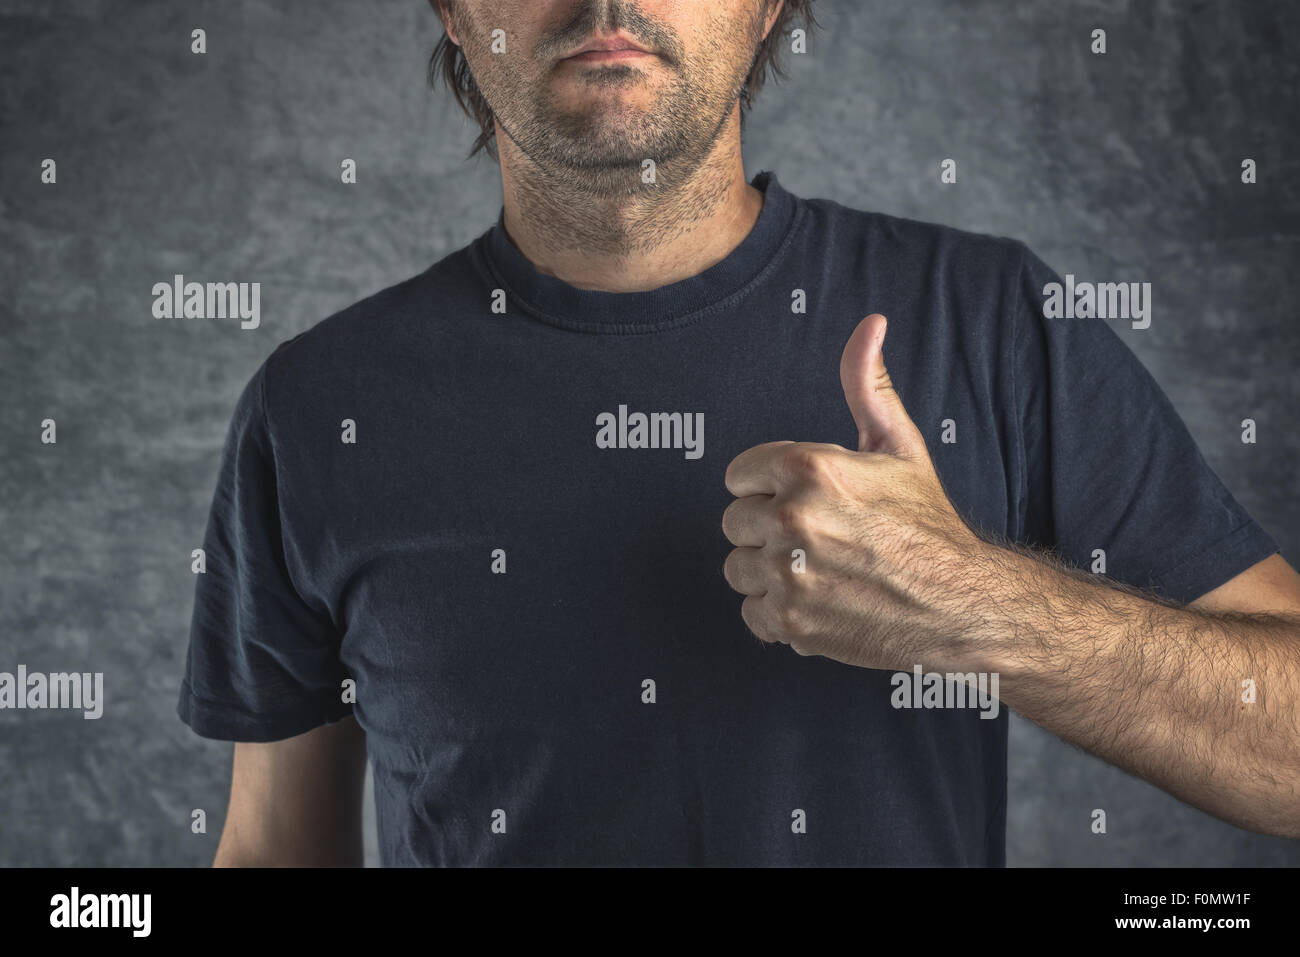 Raised thumb up for approval, adult male in black t-shirt giving endorsement sign Stock Photo